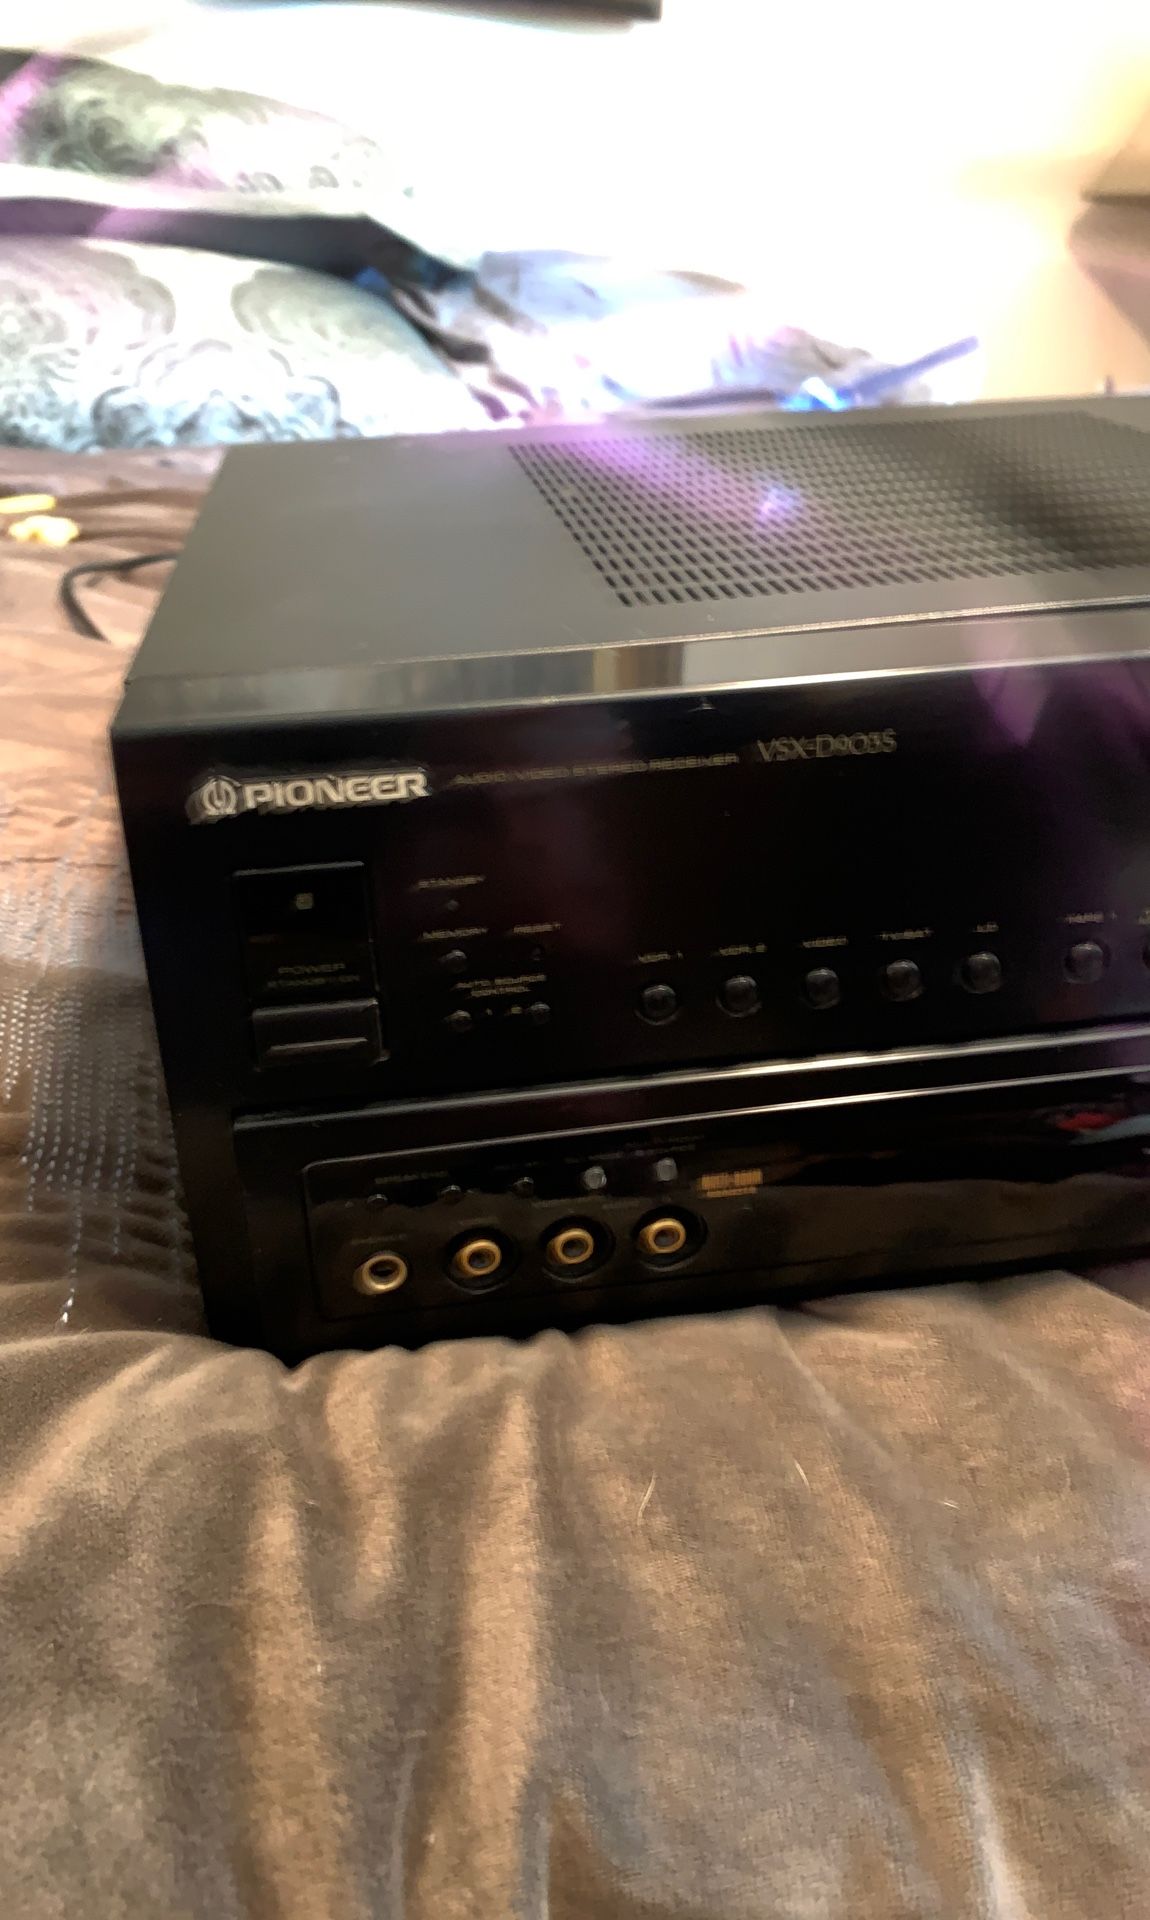 Pioneer audio video stereo receiver